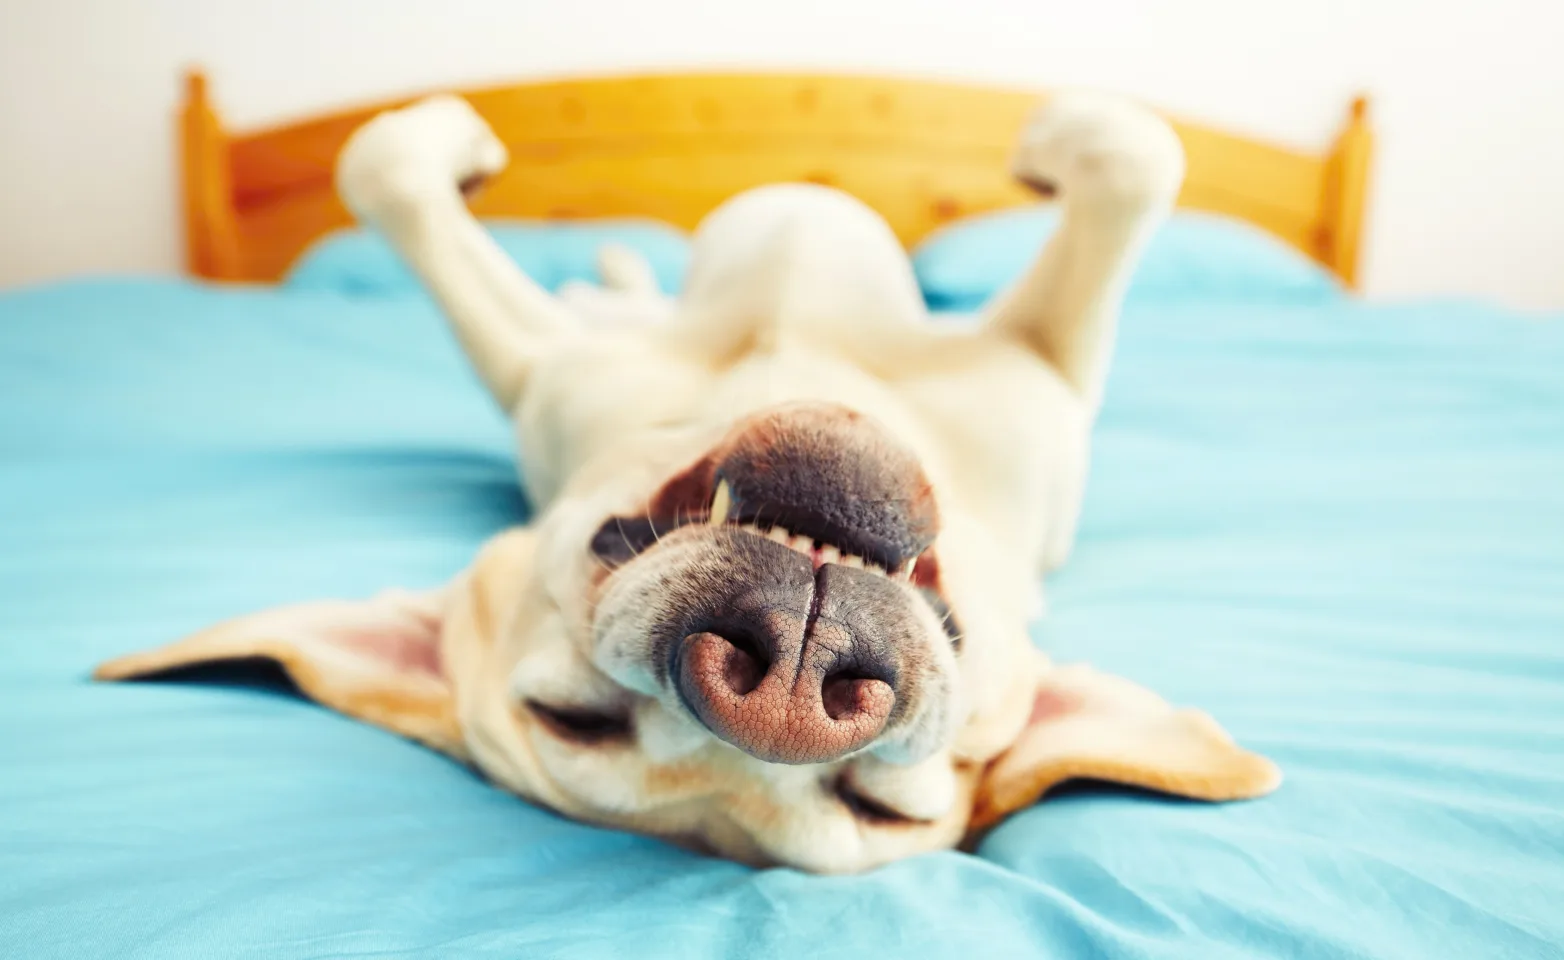 Dog lying upside down on bed